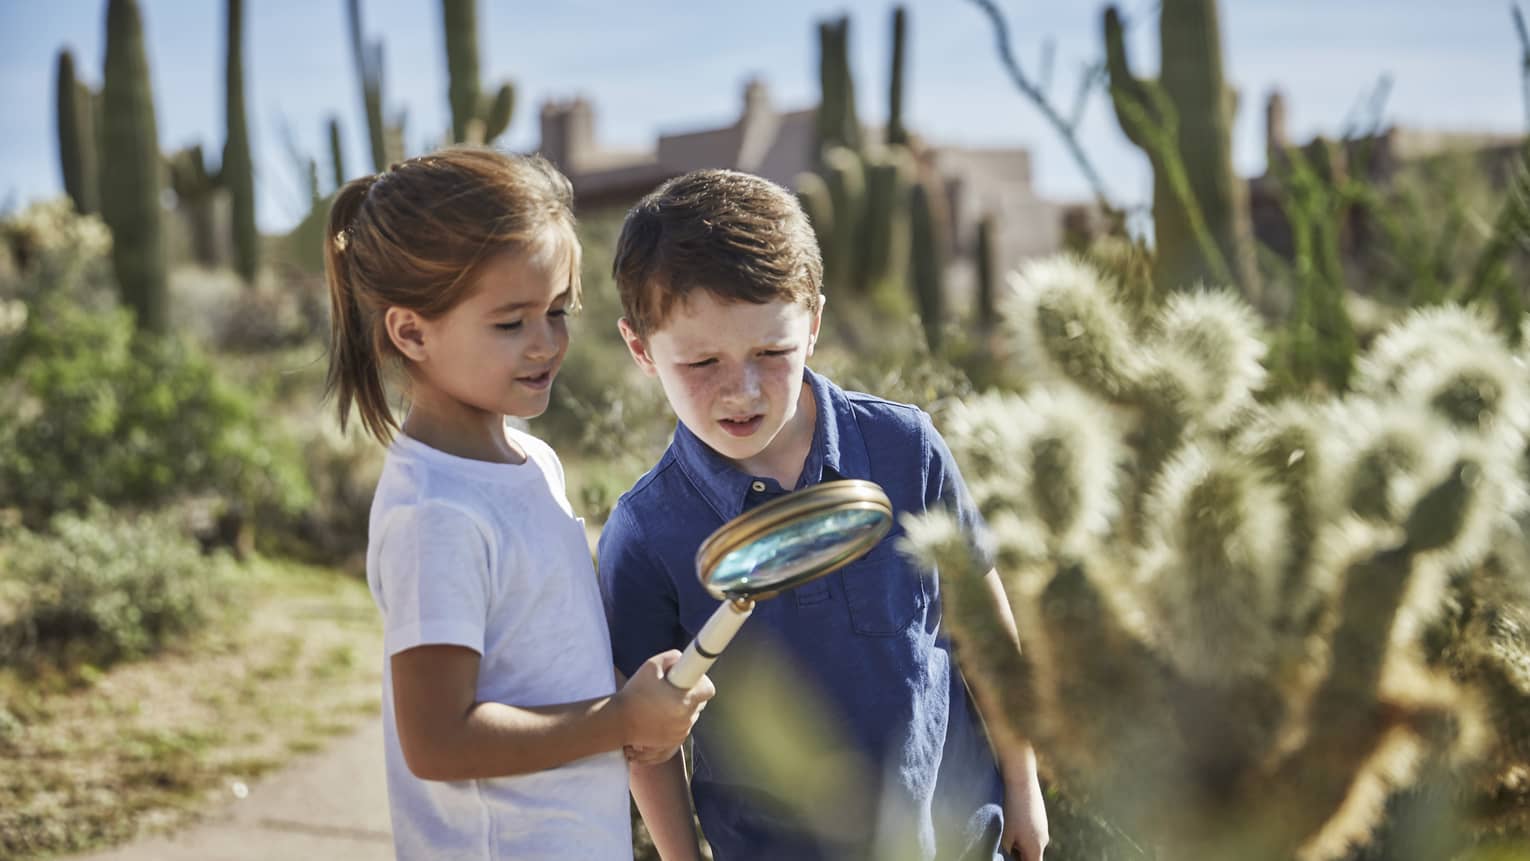 A little boy and girl investigate a cacti's arm with a magnifying glass